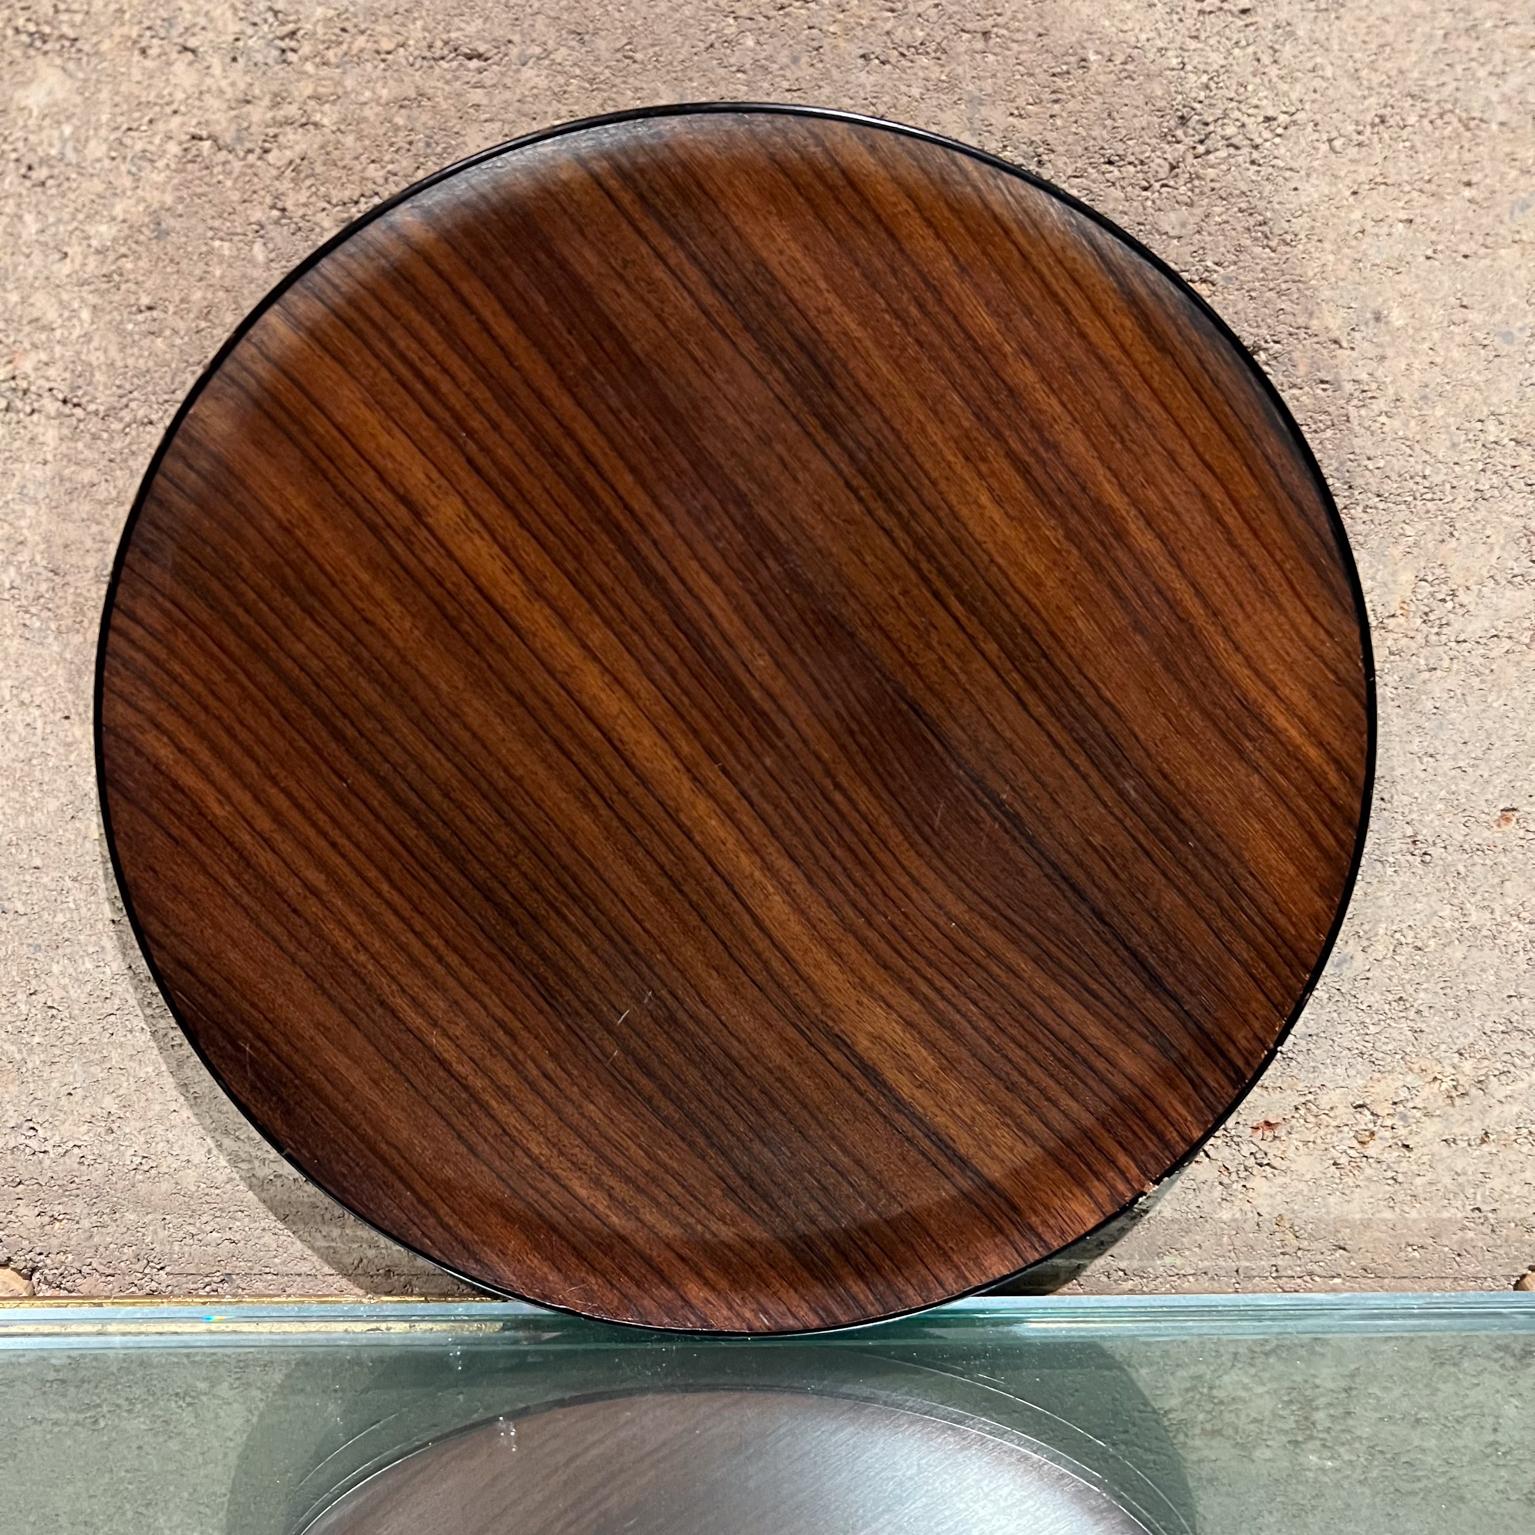 
1960s Bent Plywood Rosewood Round Service Tray
13.25 diameter x .75
appears as rosewood with black lacquer finish at bottom.
No label
Original vintage condition
See images provided.